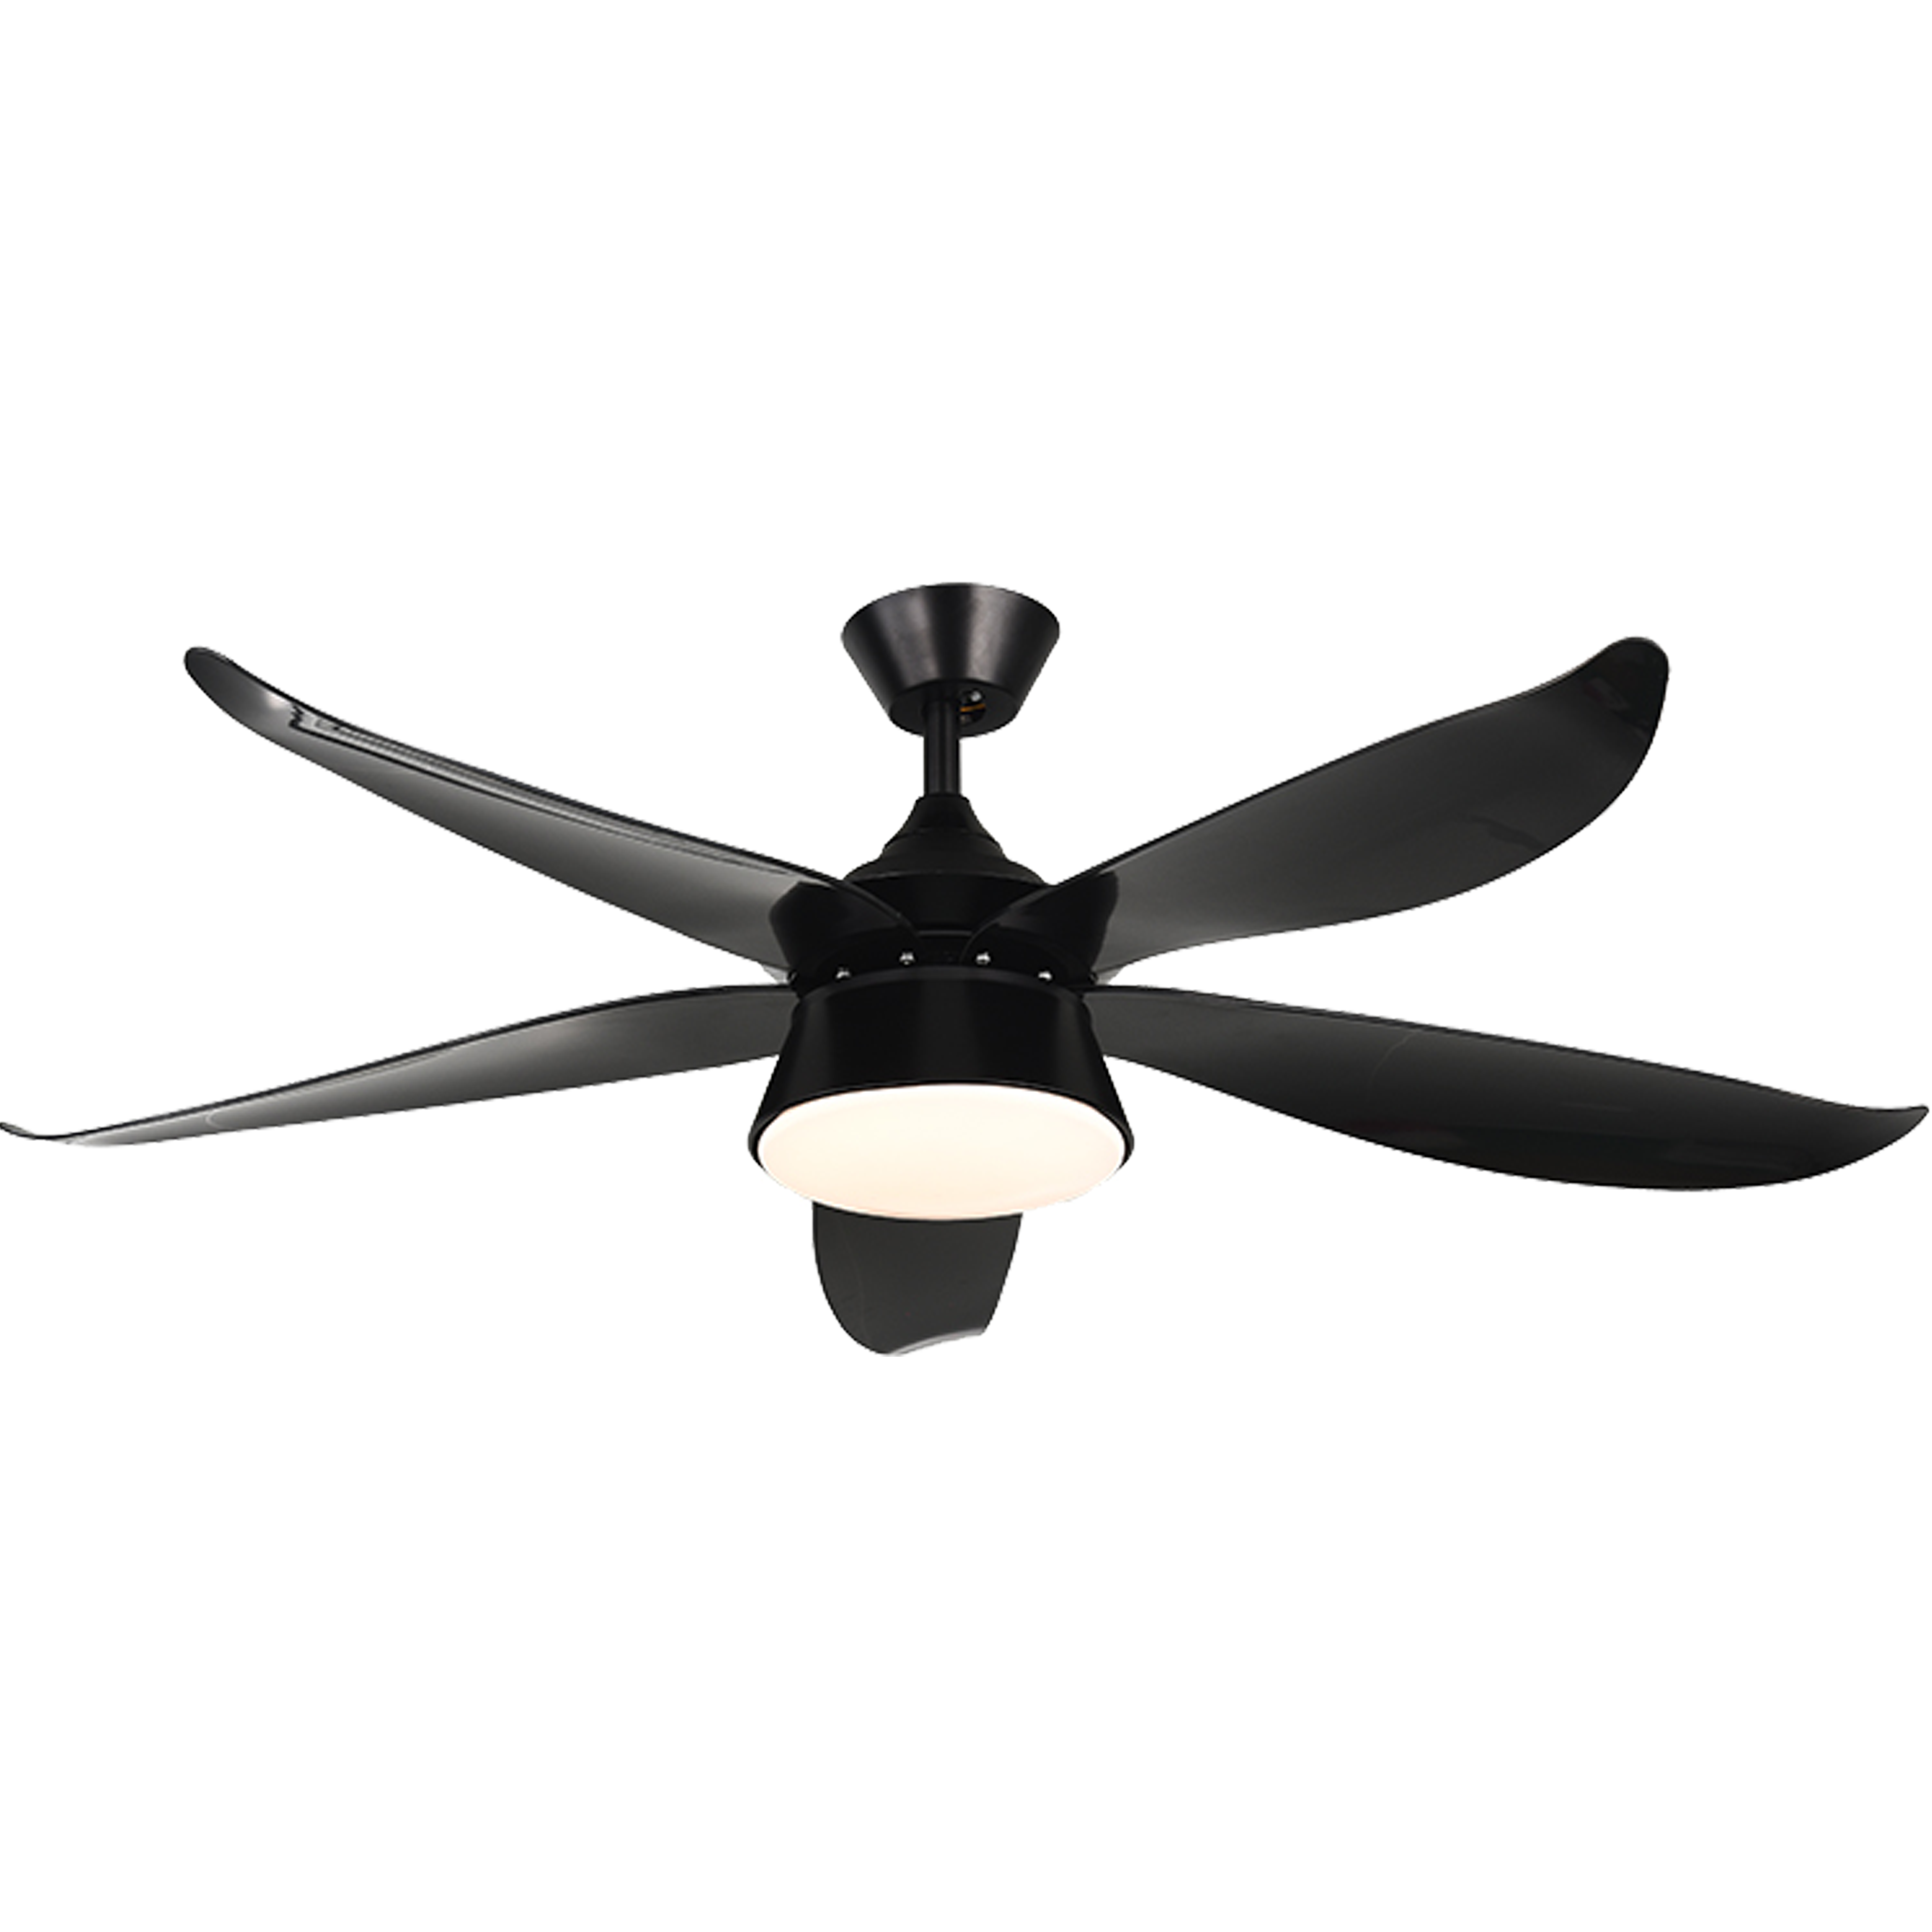 AirBena High Quality56'' DC Motor Energy Saving 5 ABS Blades Ceiling Fan with Remote Control